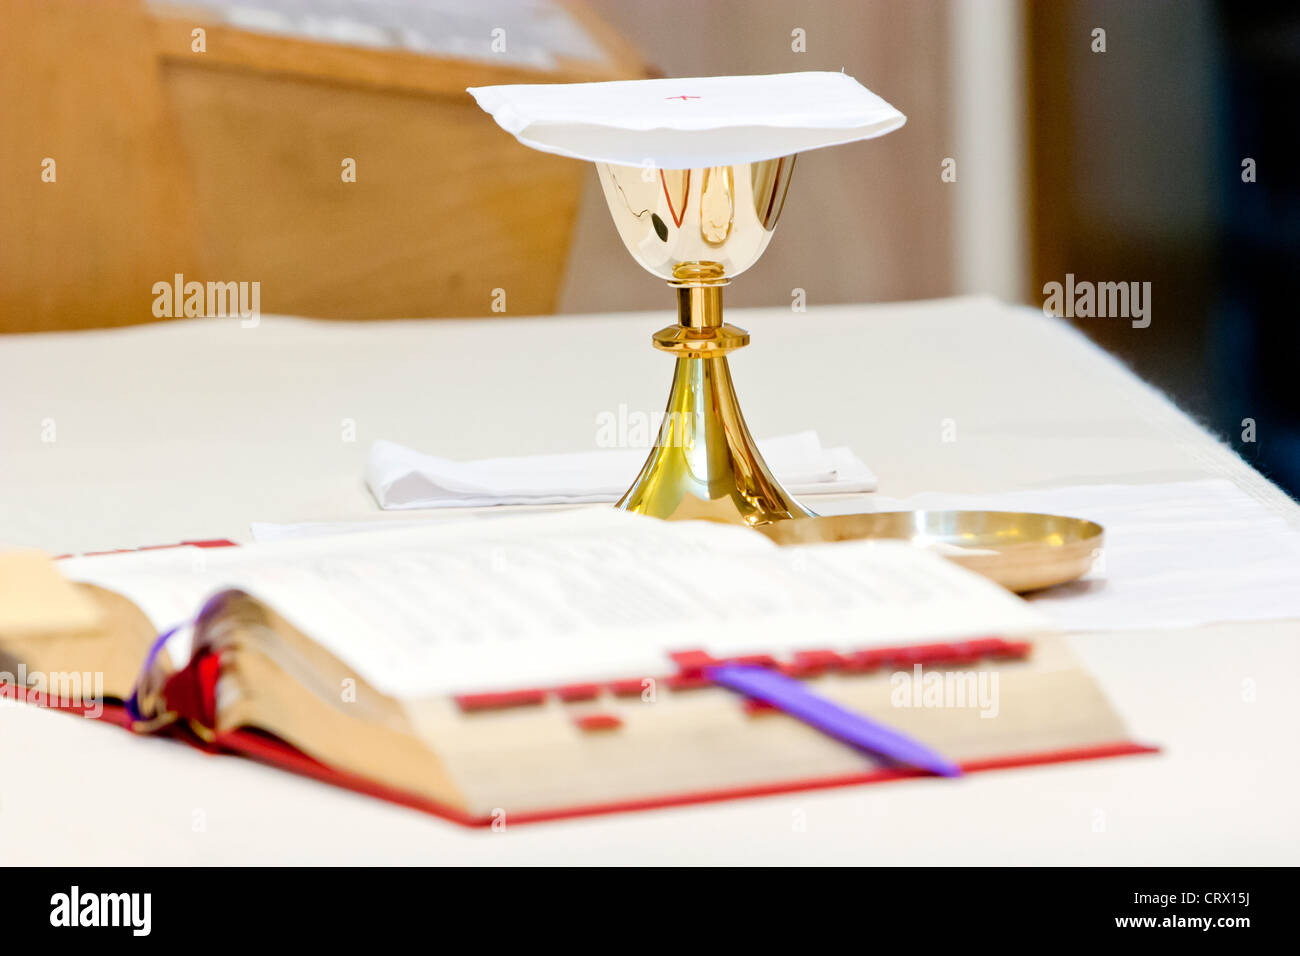 Catholic Mass, a chalice and a prayer book during the religious ceremony. Stock Photo